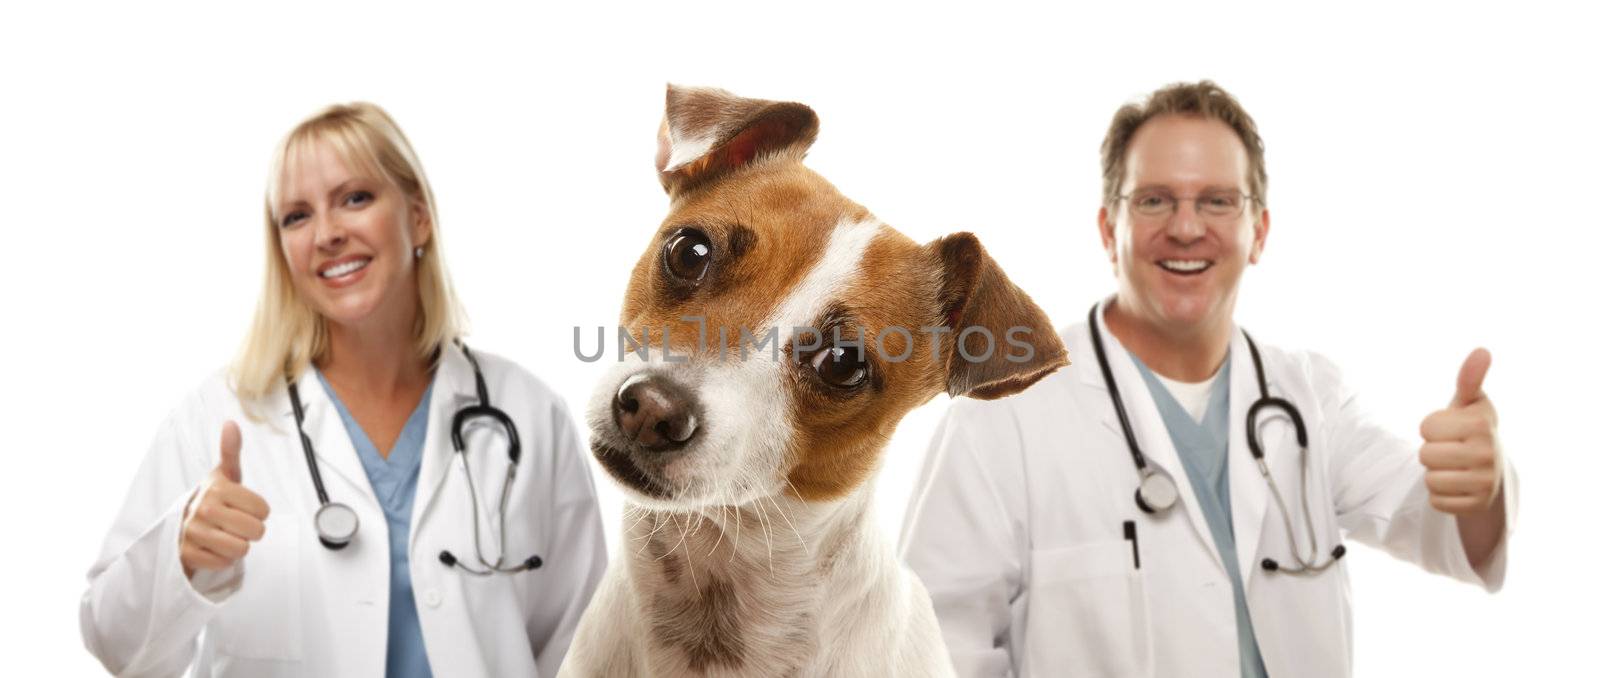 Jack Russell Terrier and Veterinarians Behind by Feverpitched